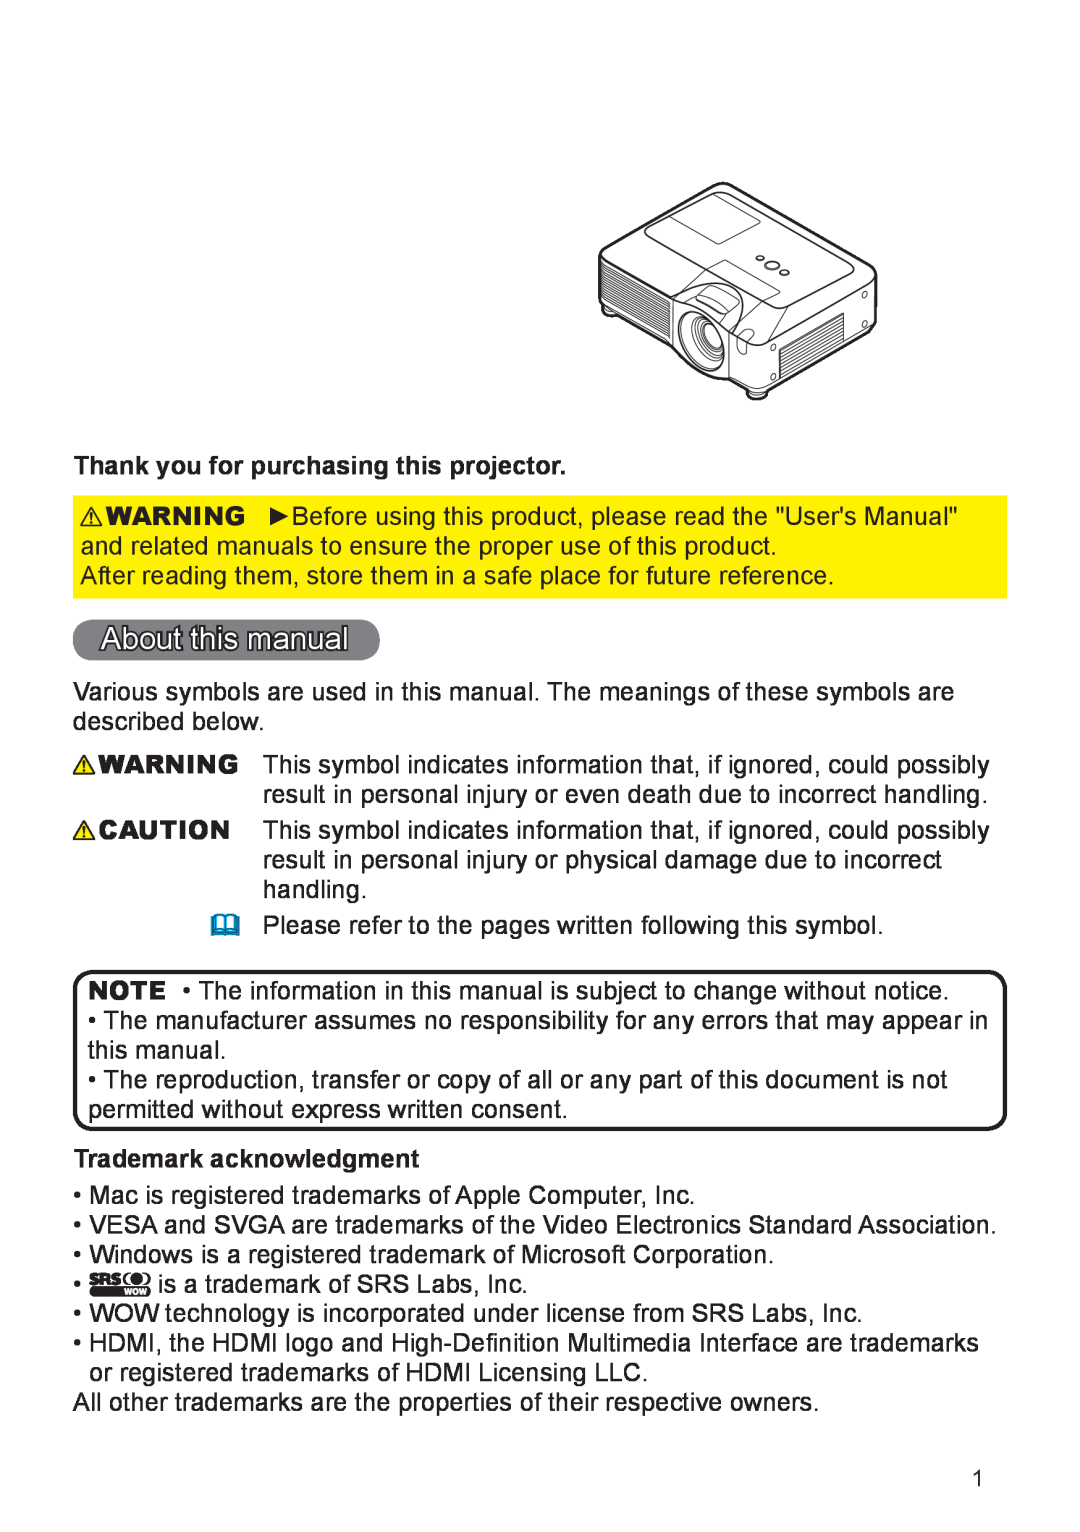 Planar PR9020 user manual About this manual, Thank you for purchasing this projector, Trademark acknowledgment 